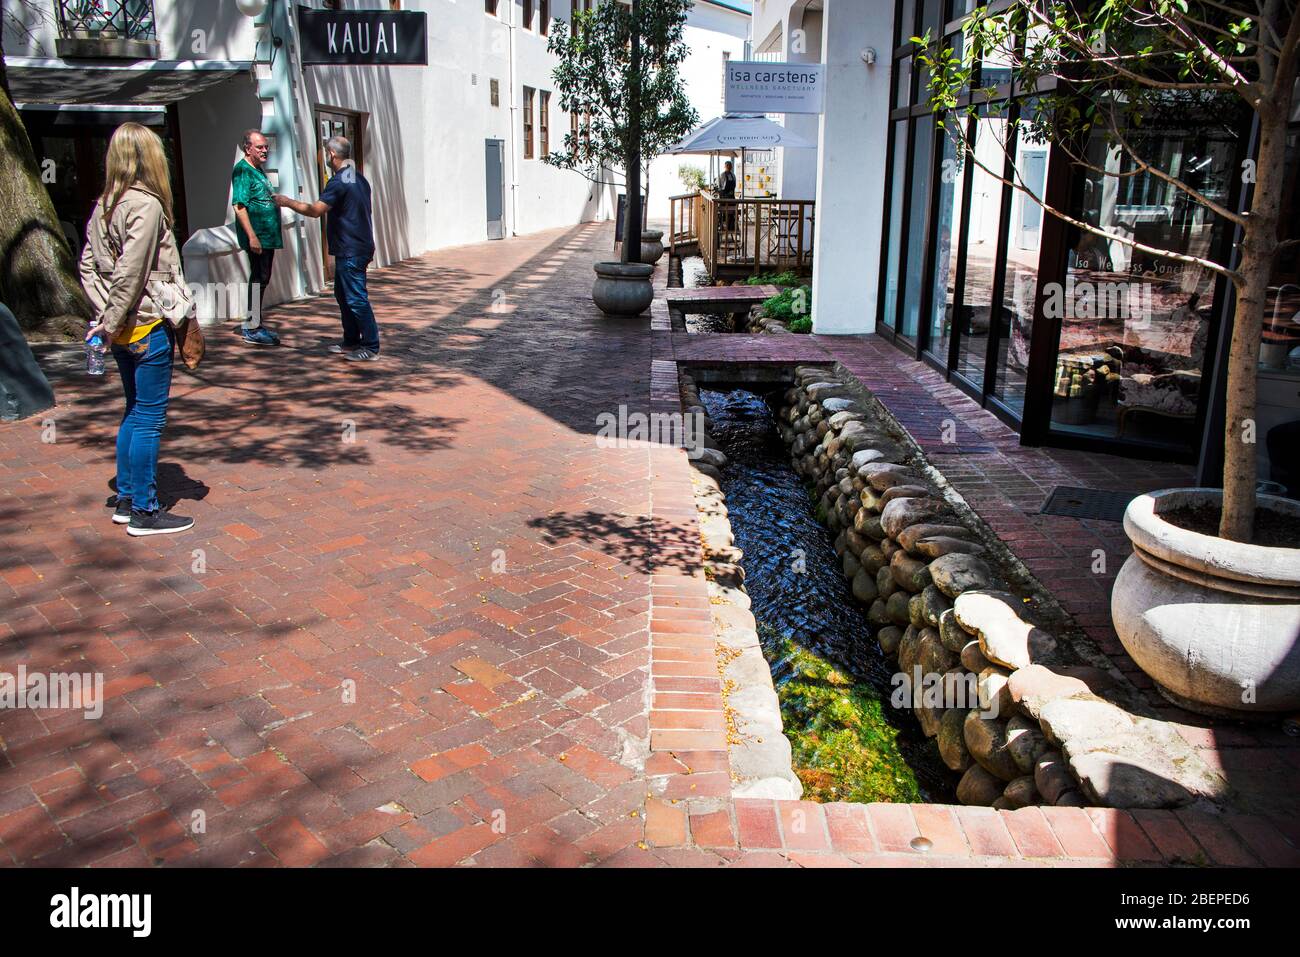 Clean water flows in historic channels on the pavement in Stellenbosch. The water furrows were designed hundreds of years ago to provide water for gardens and houses. There is a ready supply of fresh water in the area and it has helped the town to flourish. Stock Photo